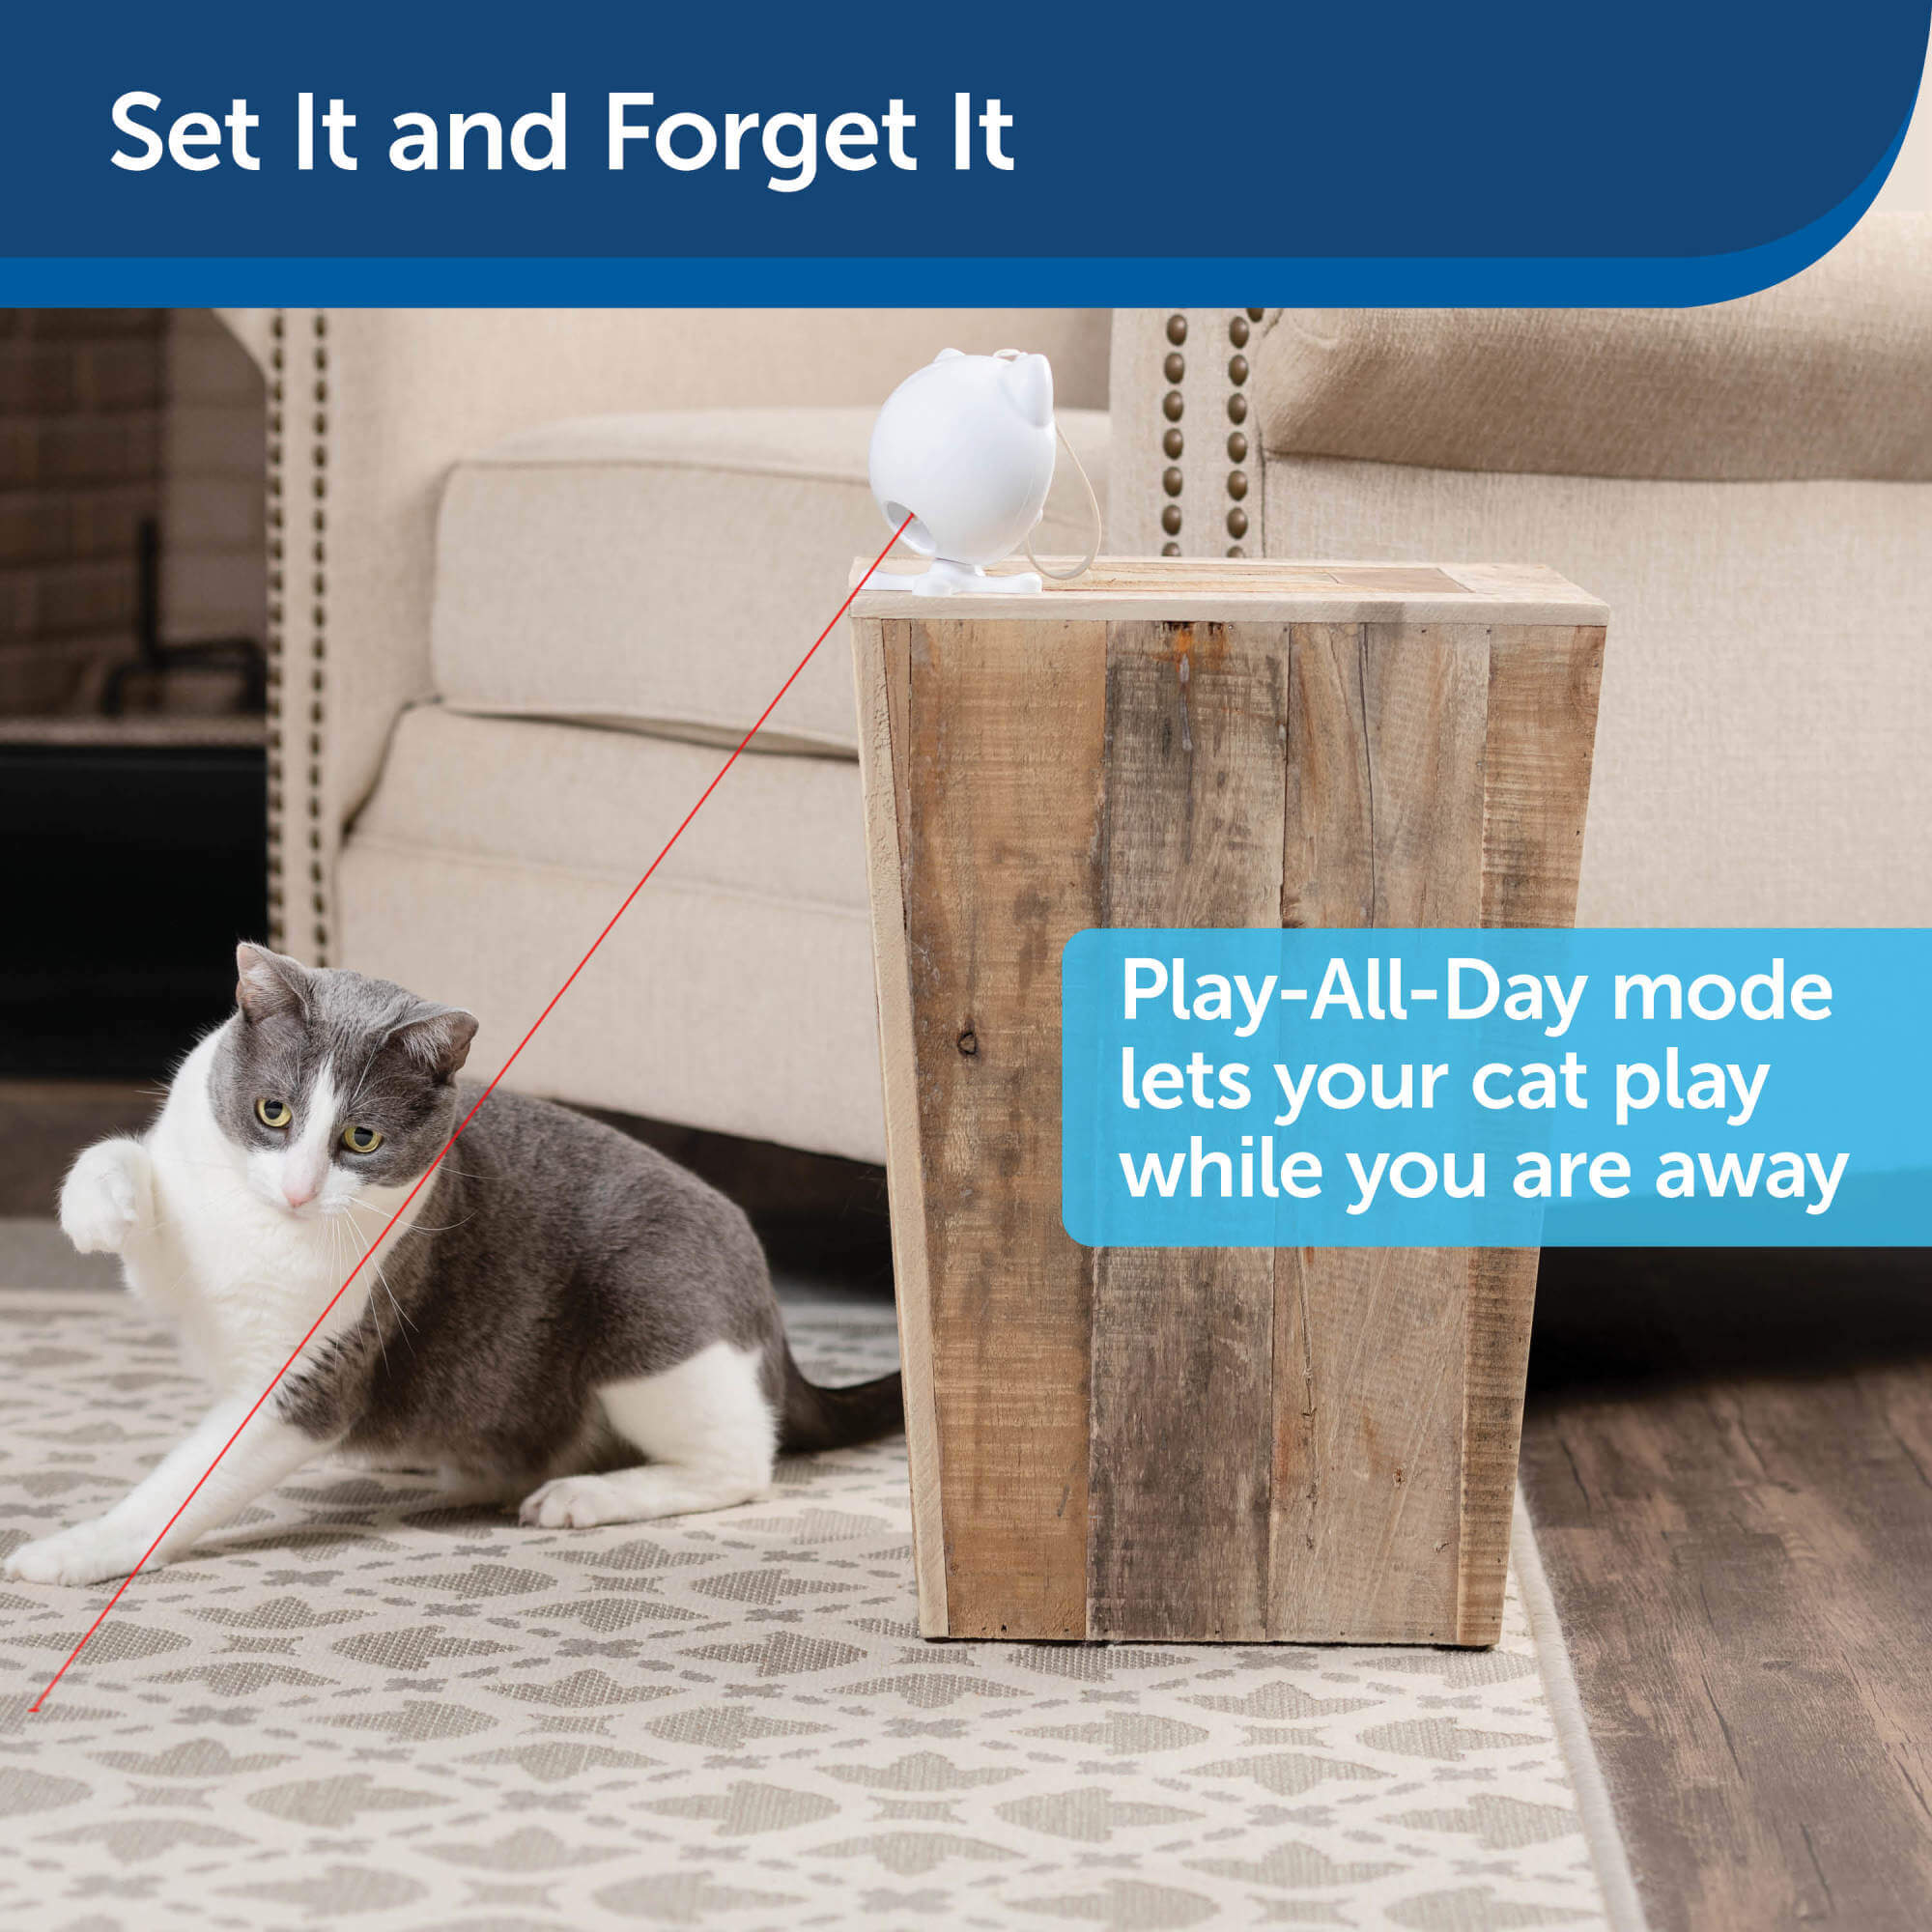 PetSafe Dancing dot cat toy set it and forget it